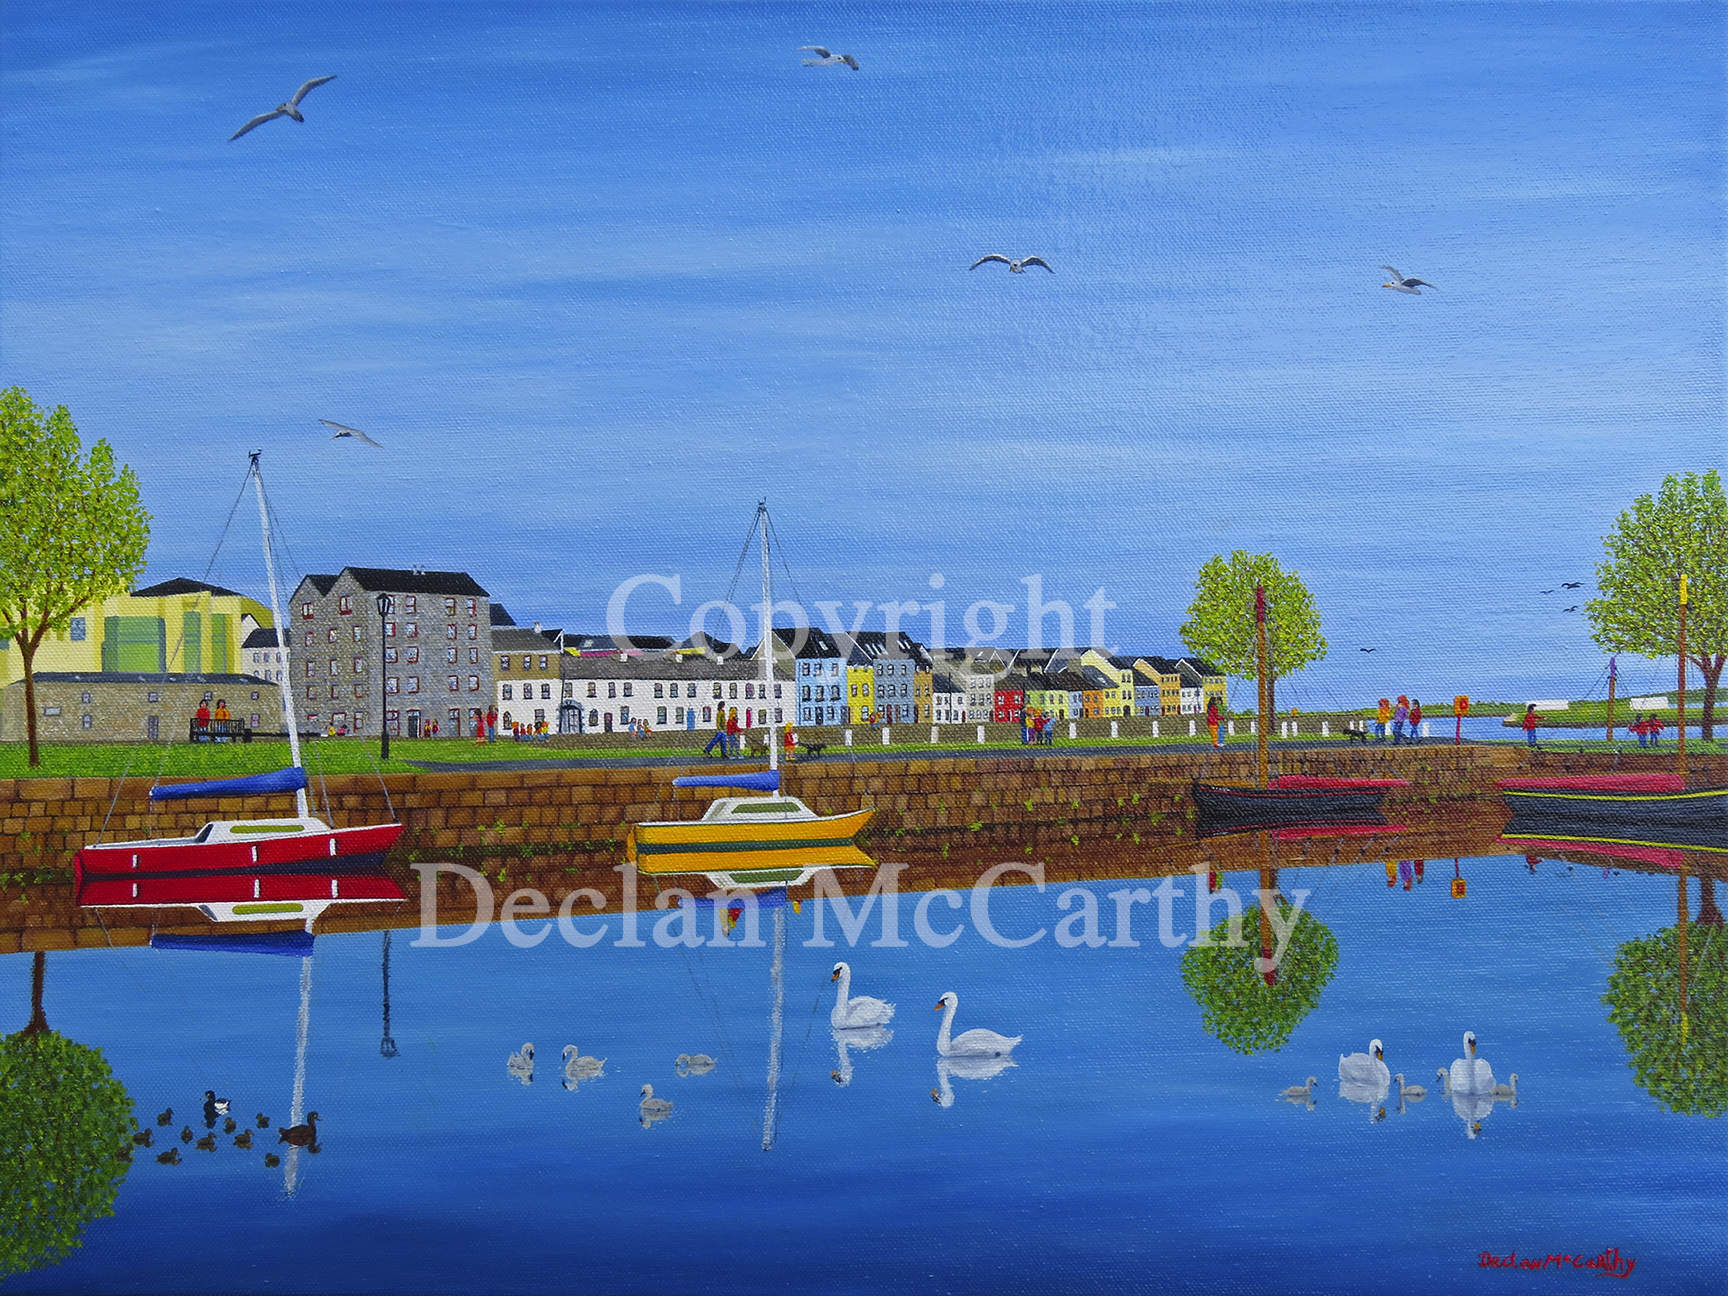 The Claddagh Basin and The Long Walk in Galway City viewed from Claddagh Quay.